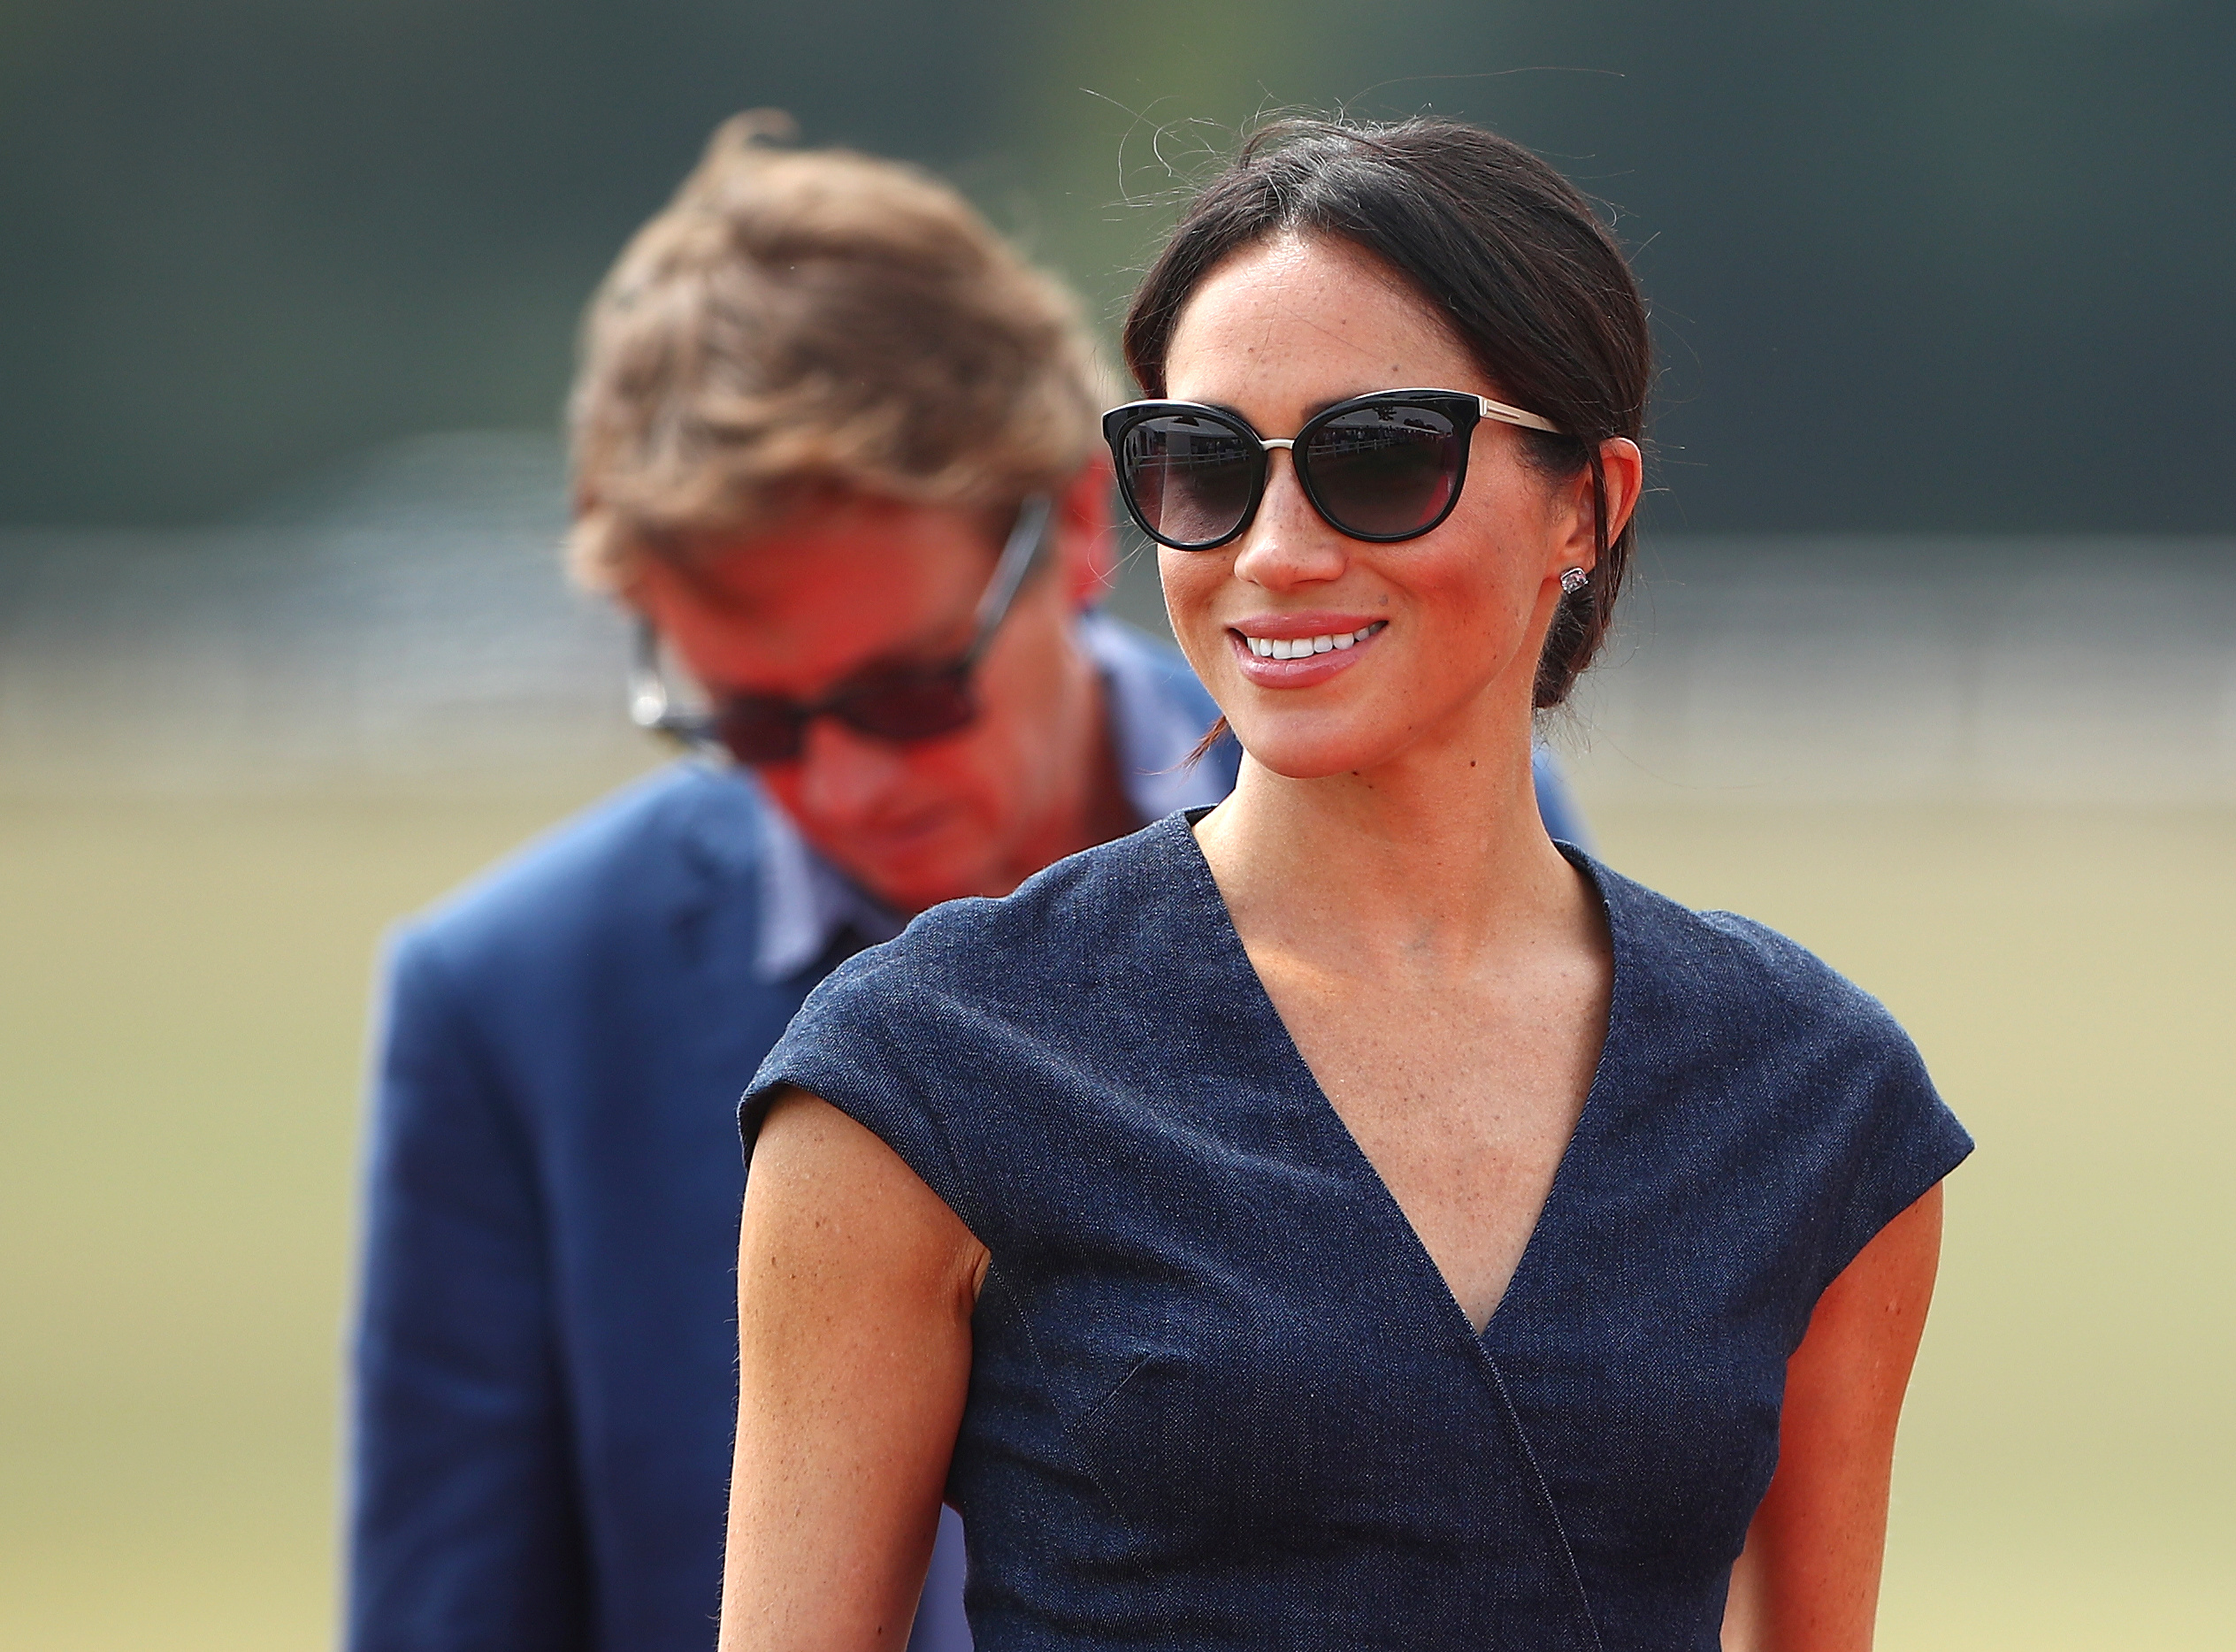 Meghan the Duchess of Sussex arrives at a charity polo match in Windsor, Britain, July 26, 2018. REUTERS/Hannah McKay - RC1FF4D82360